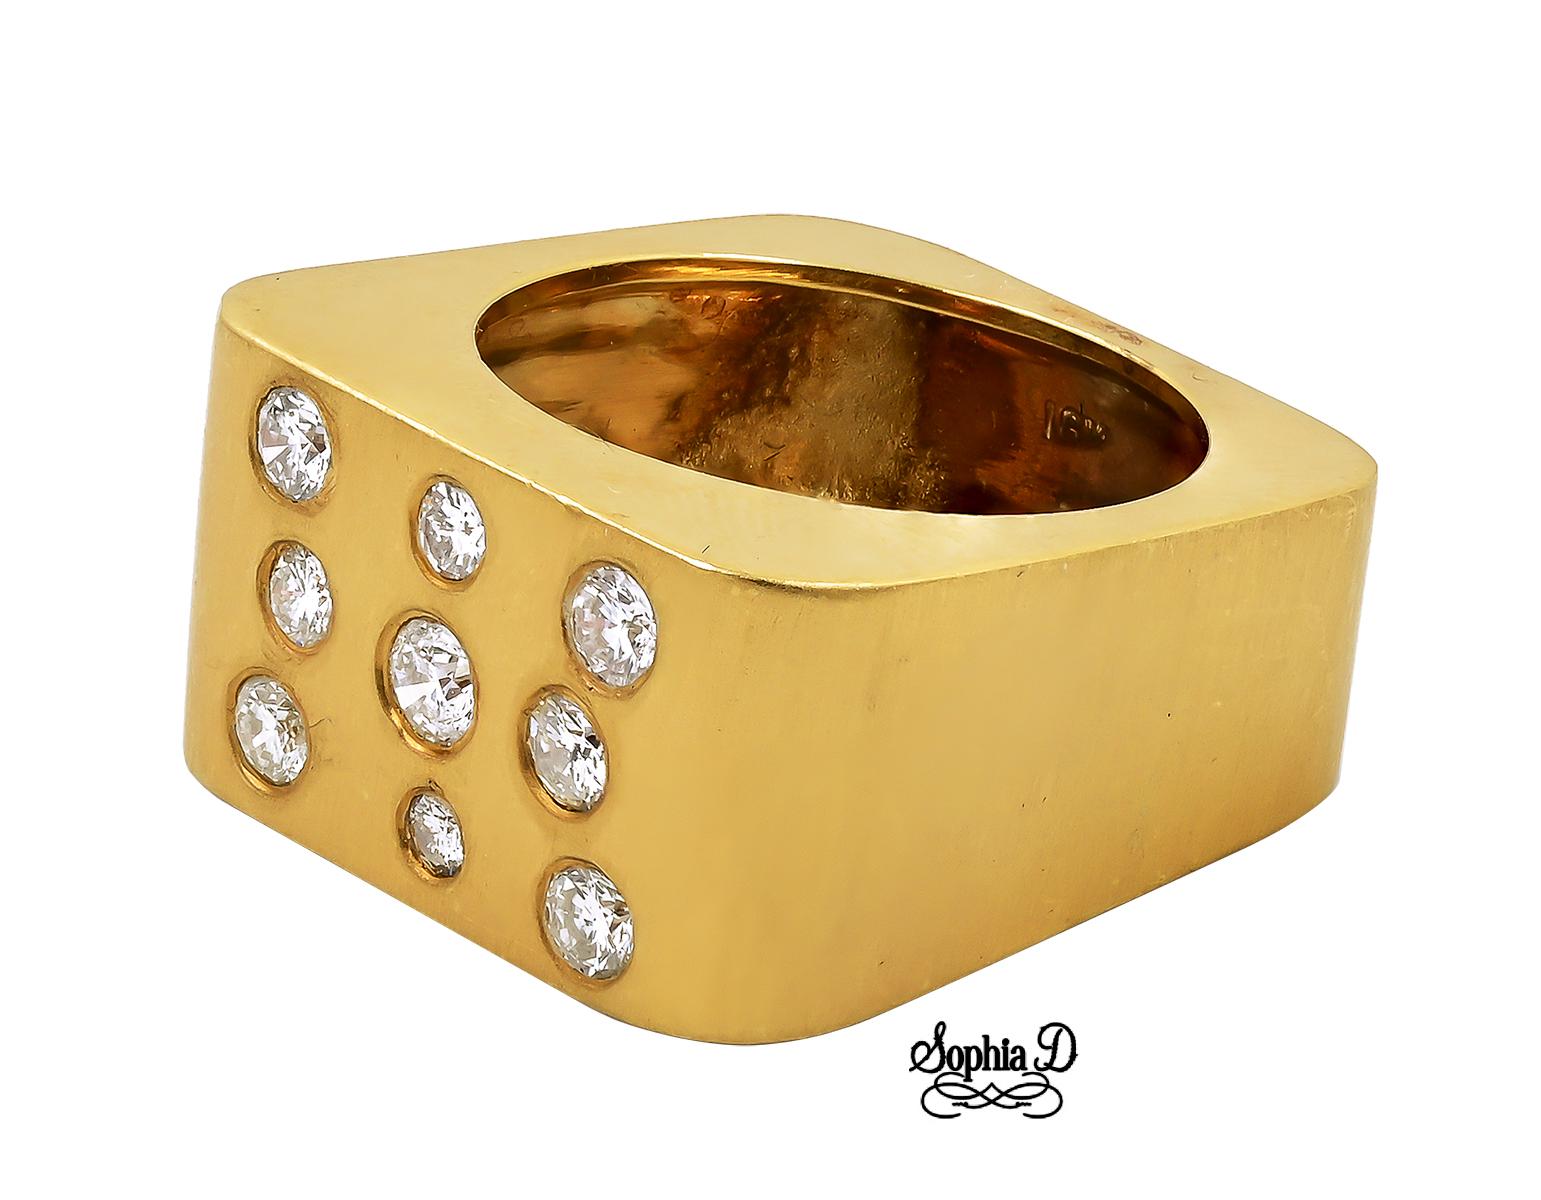 18K yellow gold ring with 9 small round diamonds.

Sophia D by Joseph Dardashti LTD has been known worldwide for 35 years and are inspired by classic Art Deco design that merges with modern manufacturing techniques.  